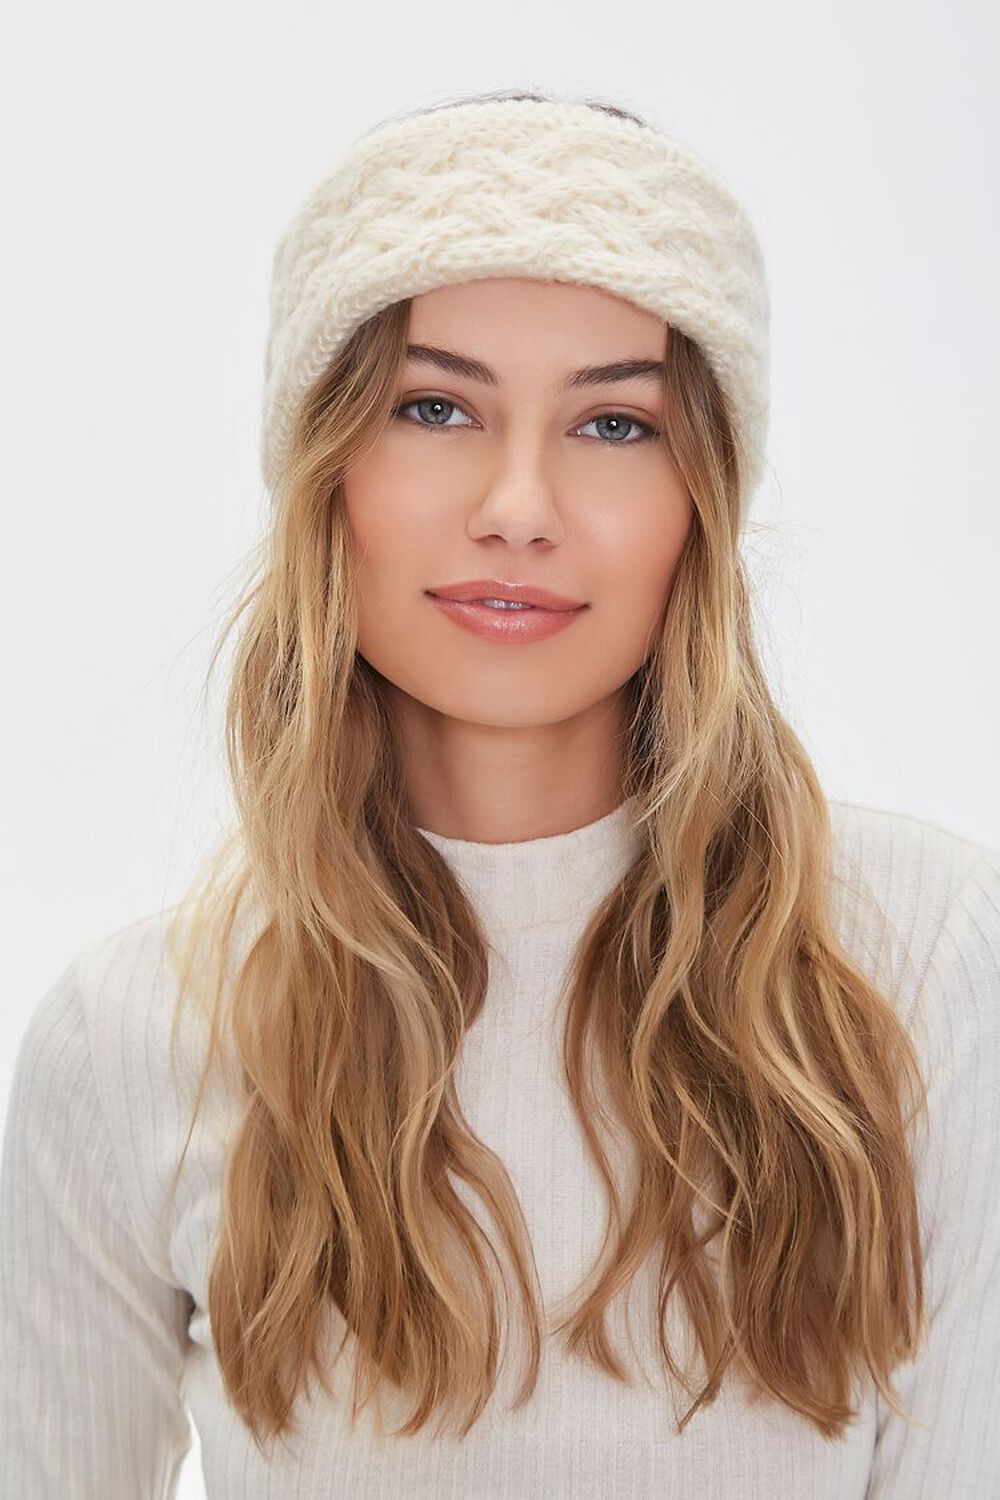 CREAM Brushed Cable Knit Headwrap, image 1